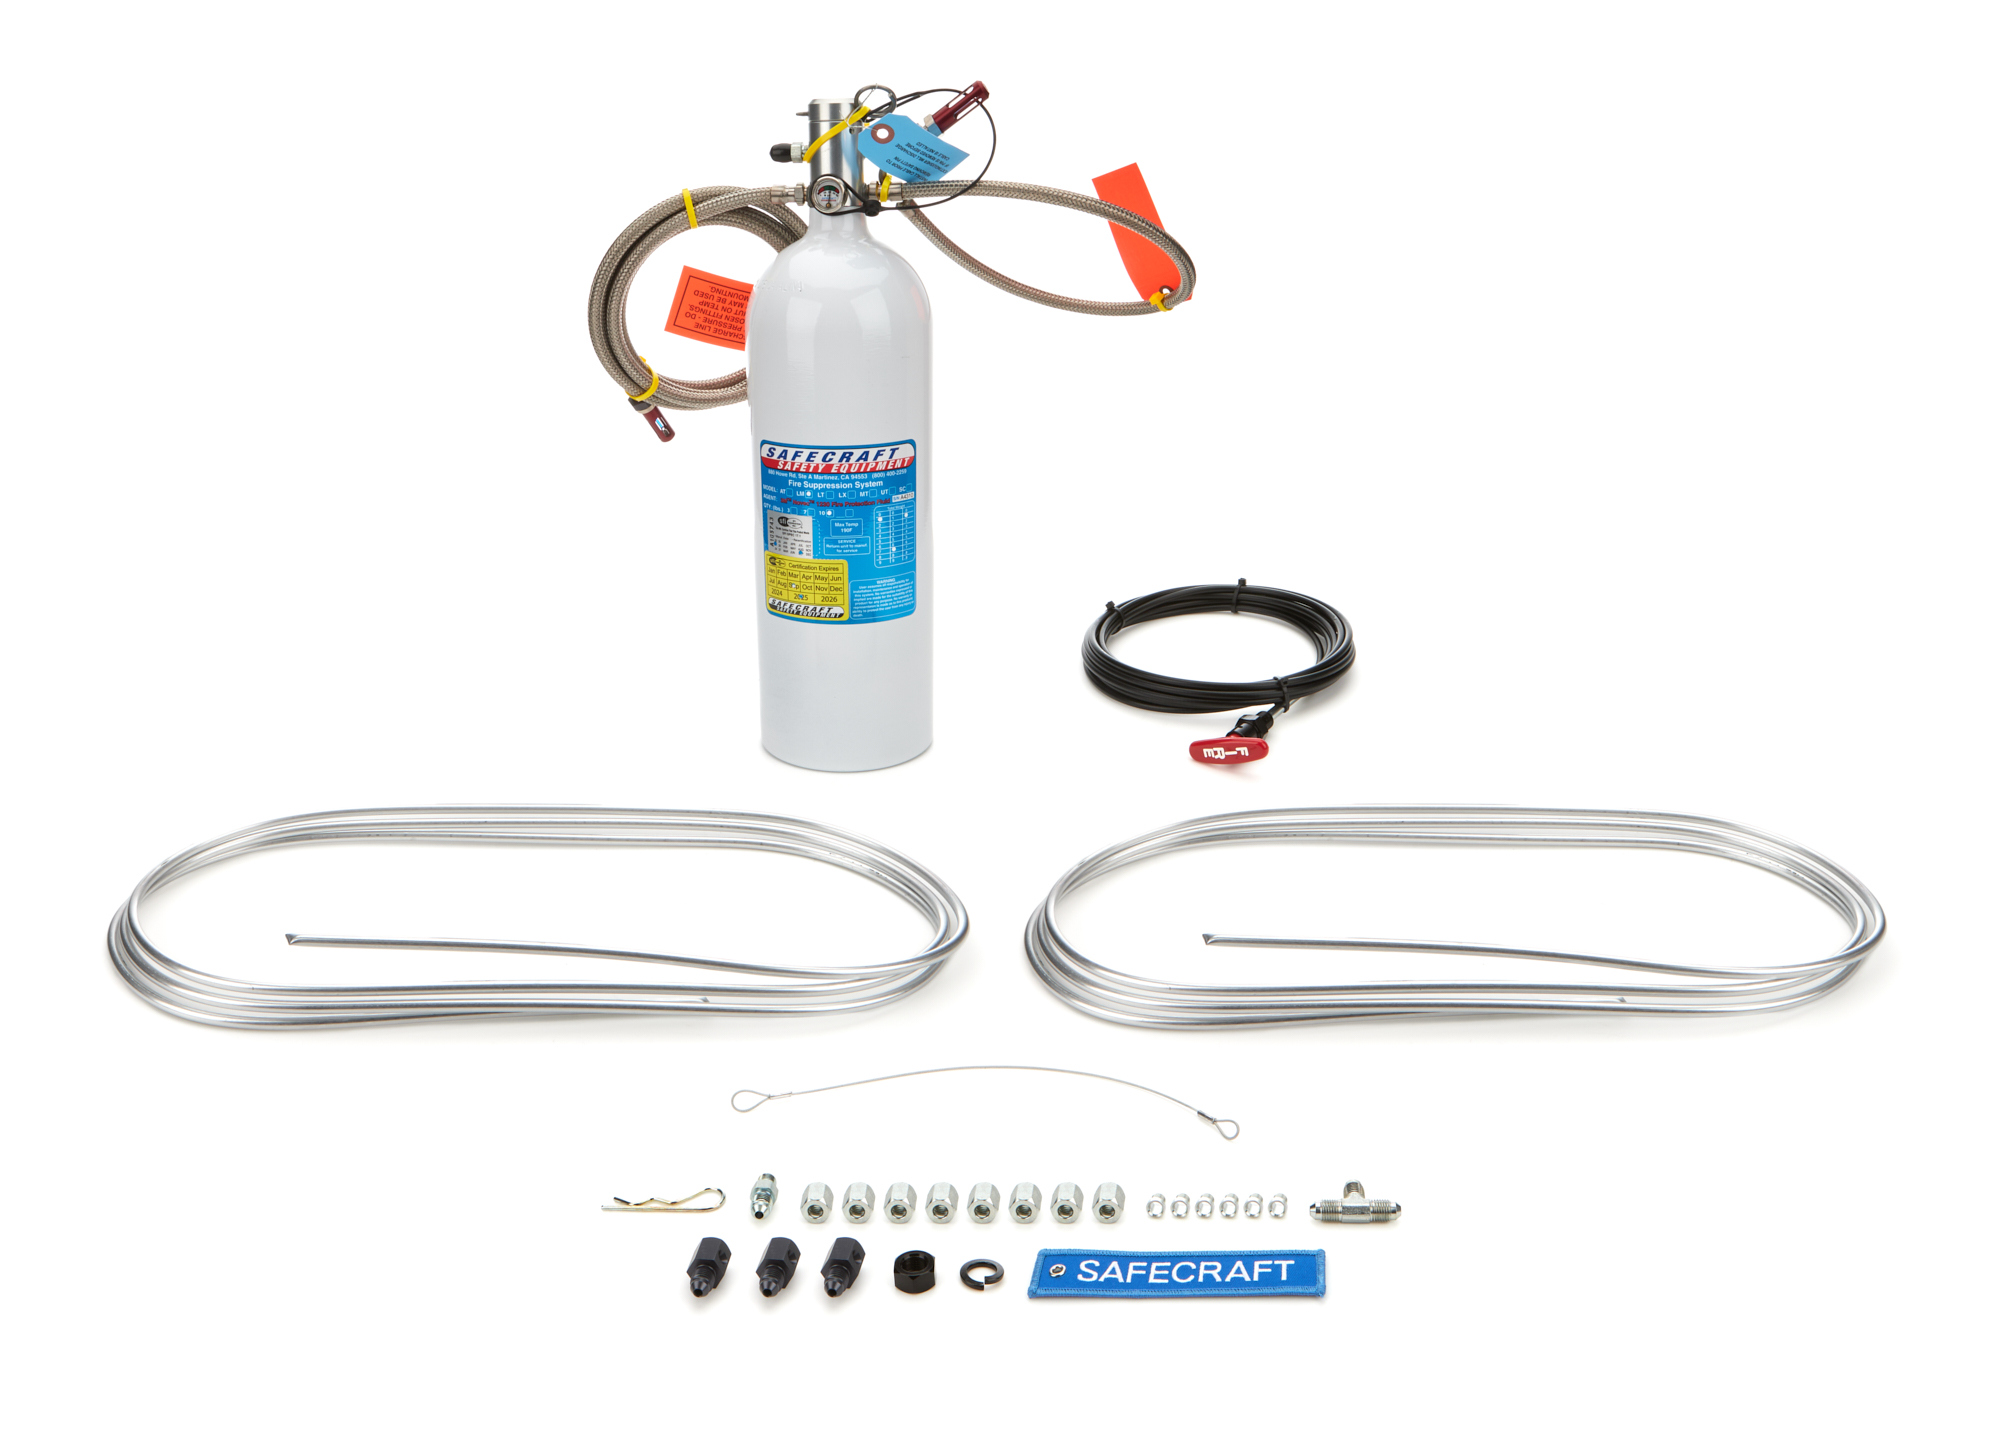 Safecraft LM10JHG-21-85-B Fire Suppression System, AT Series, Automatic / Manual, Novec 1230, 10.0 lb Bottle, 21 in / 85 in Long Hoses, Fittings / Sensor / Pull Cable Included, Kit